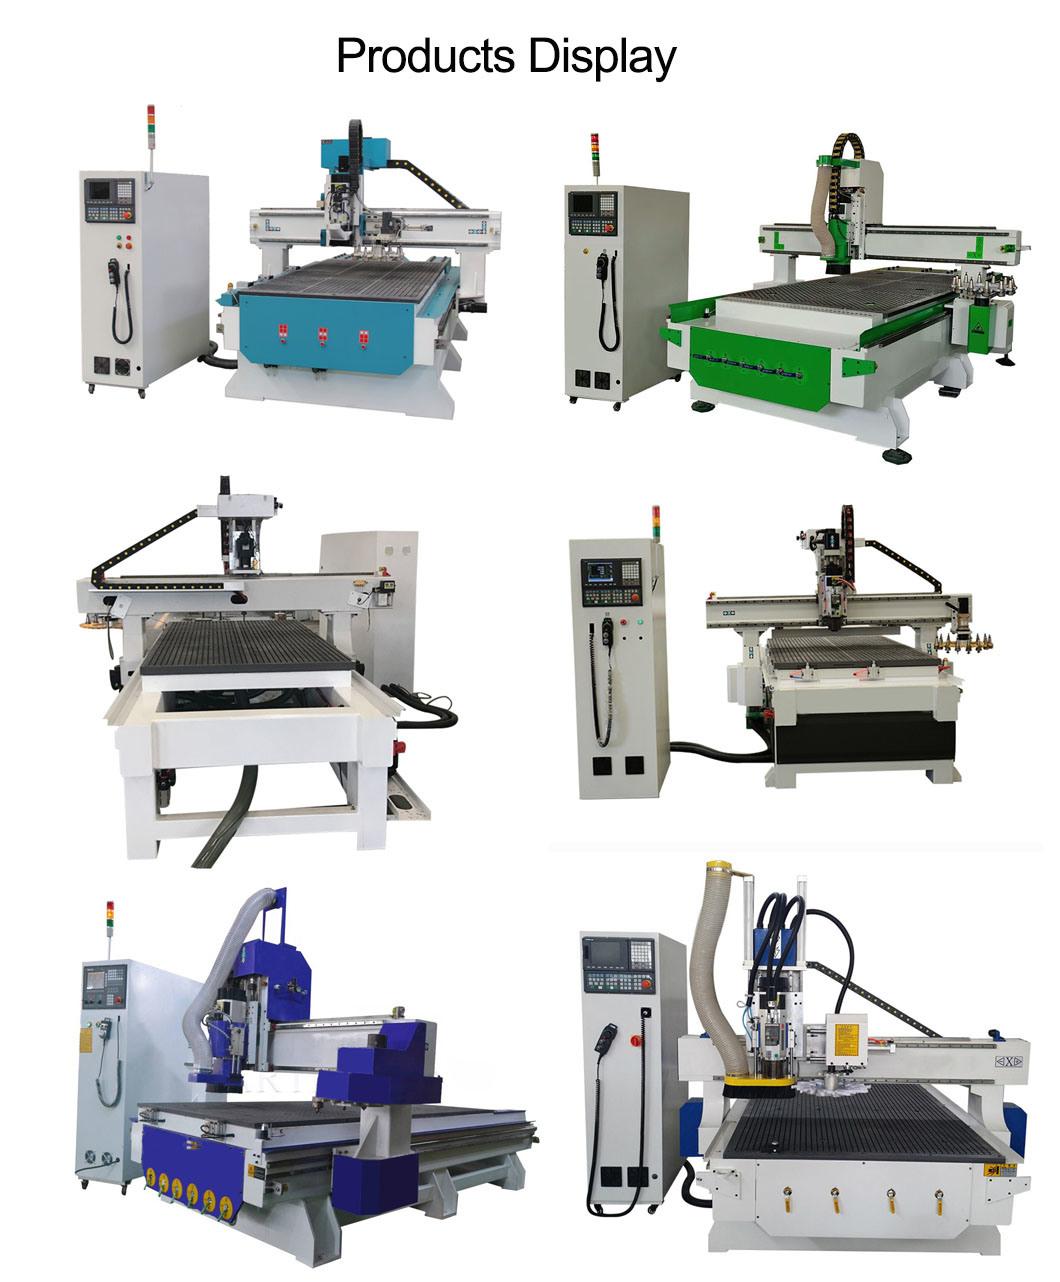 3D Sculpture Automatic Tool Changer with Servo Motor CNC Wood Carving/Engraving/Cutting Woodworking Machine